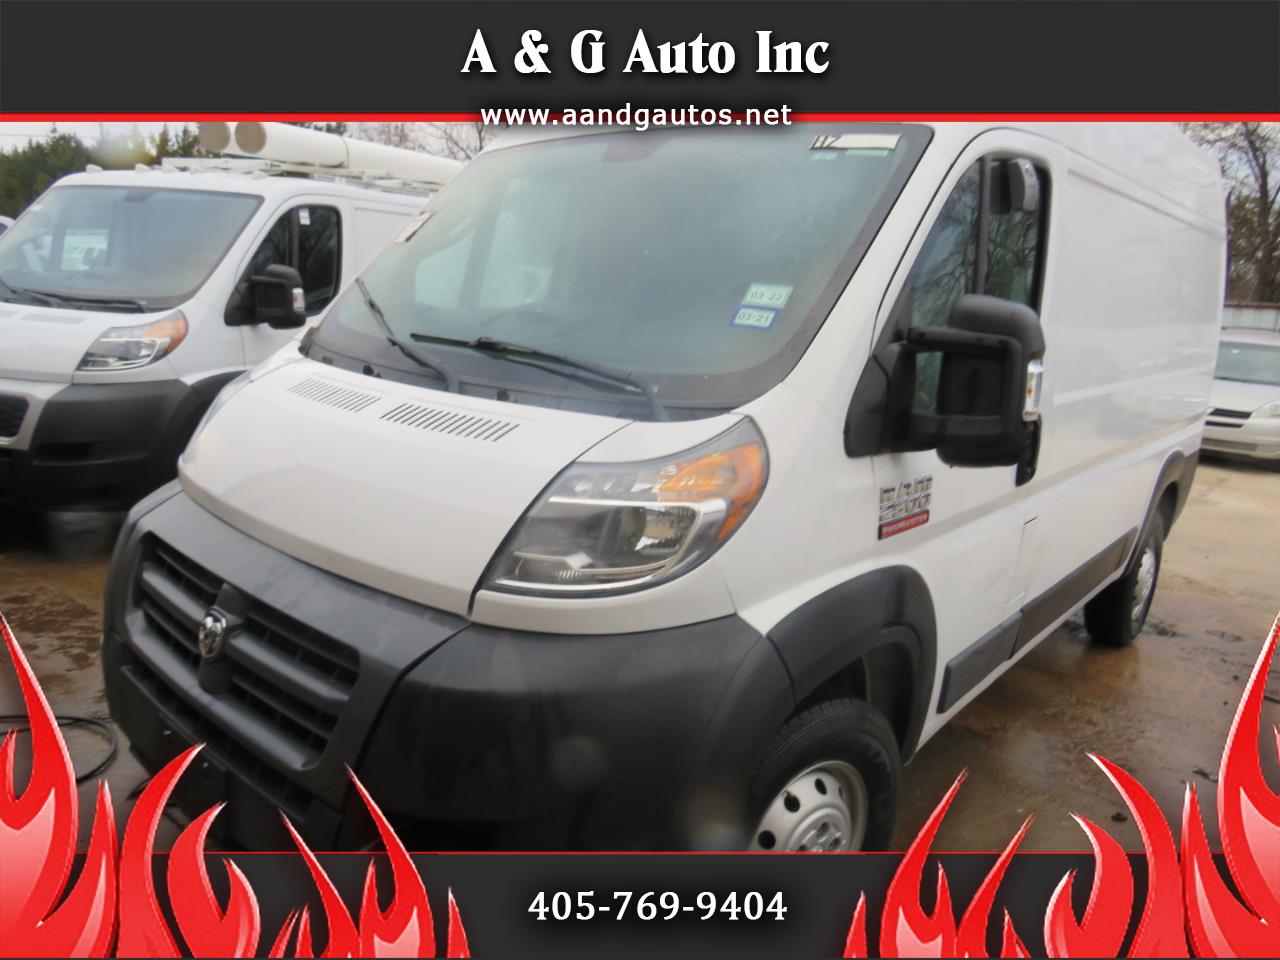 2019 RAM Promaster for sale in Oklahoma City OK 73141 by A & G Auto Inc